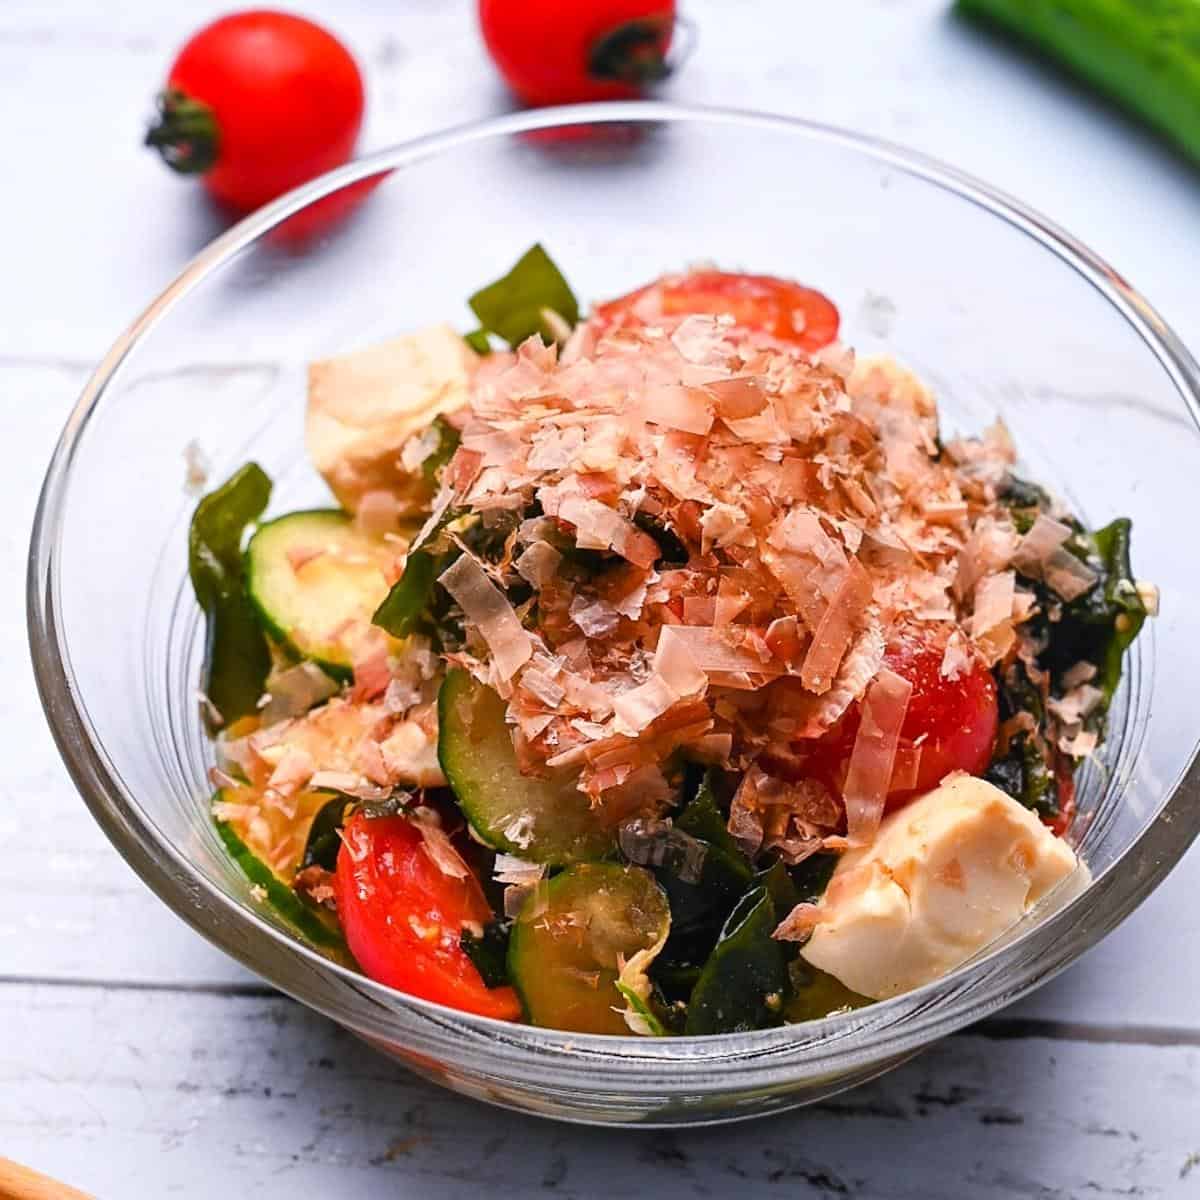 Japanese wakame seaweed salad made with tofu, cucumber and mini tomatoes in a small glass bowl